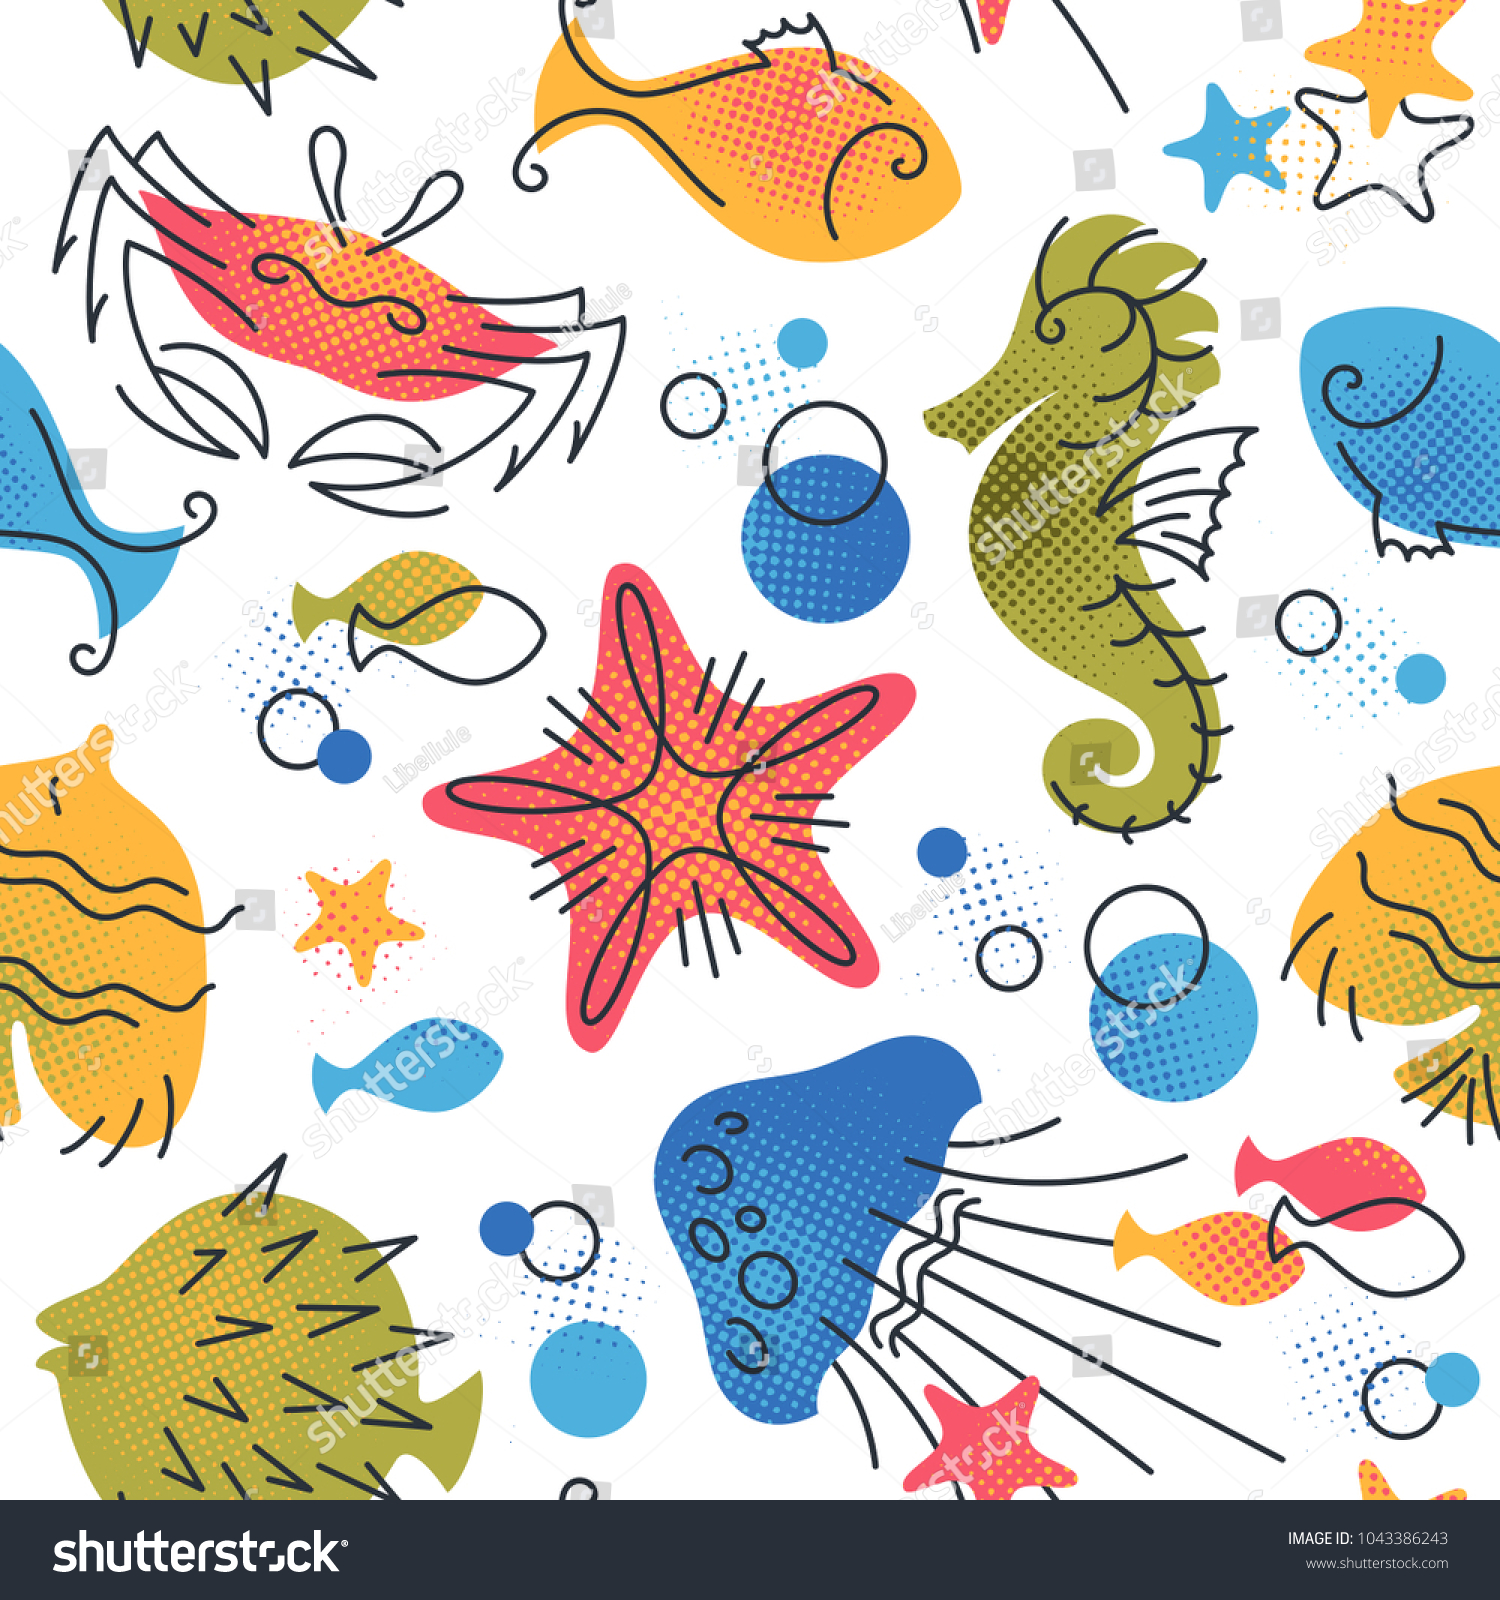 stock-vector-marine-life-color-flat-seamless-pattern-with-fish-sea-and-ocean-creatures-1043386243